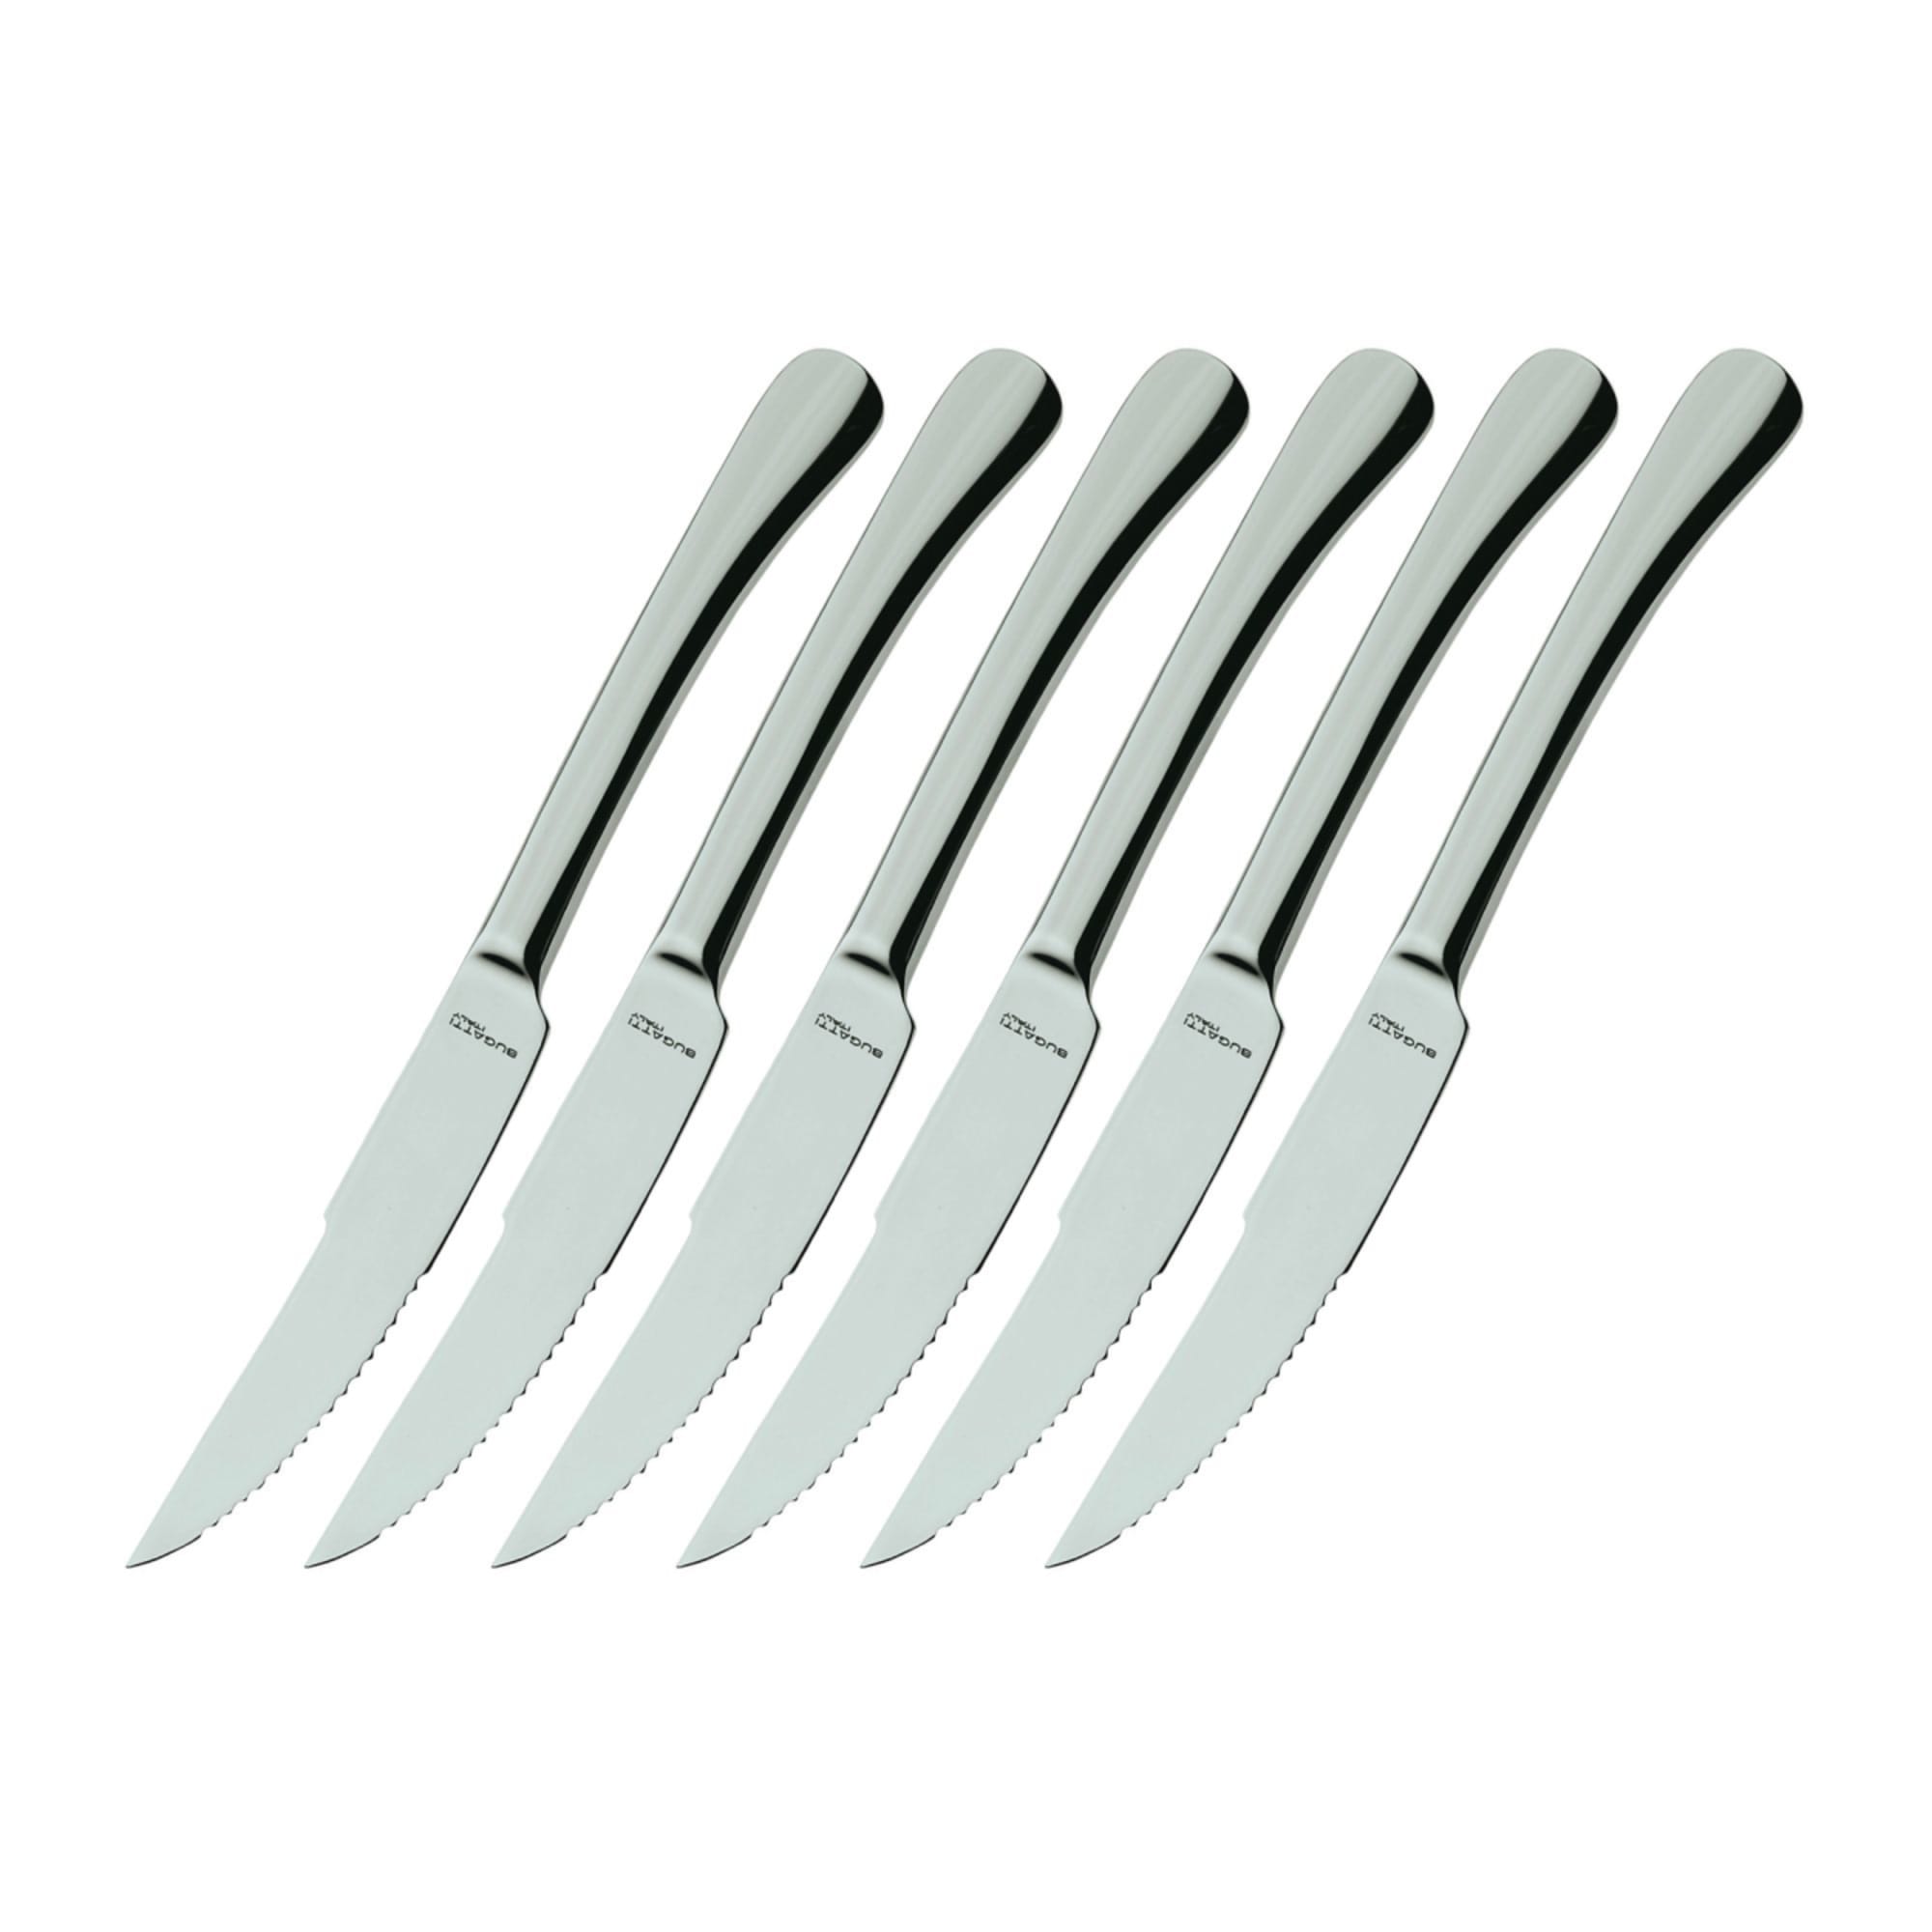 https://res.cloudinary.com/kitchenwarehouse/image/upload/c_fill,g_face,w_1250/f_auto/t_PDP_2000x2000/Supplier%20Images%20/2000px/Bugatti-Settimocielo-Steak-Knife-Set-of-6-Chrome_1_2000px.jpg?imagetype=pdp_full